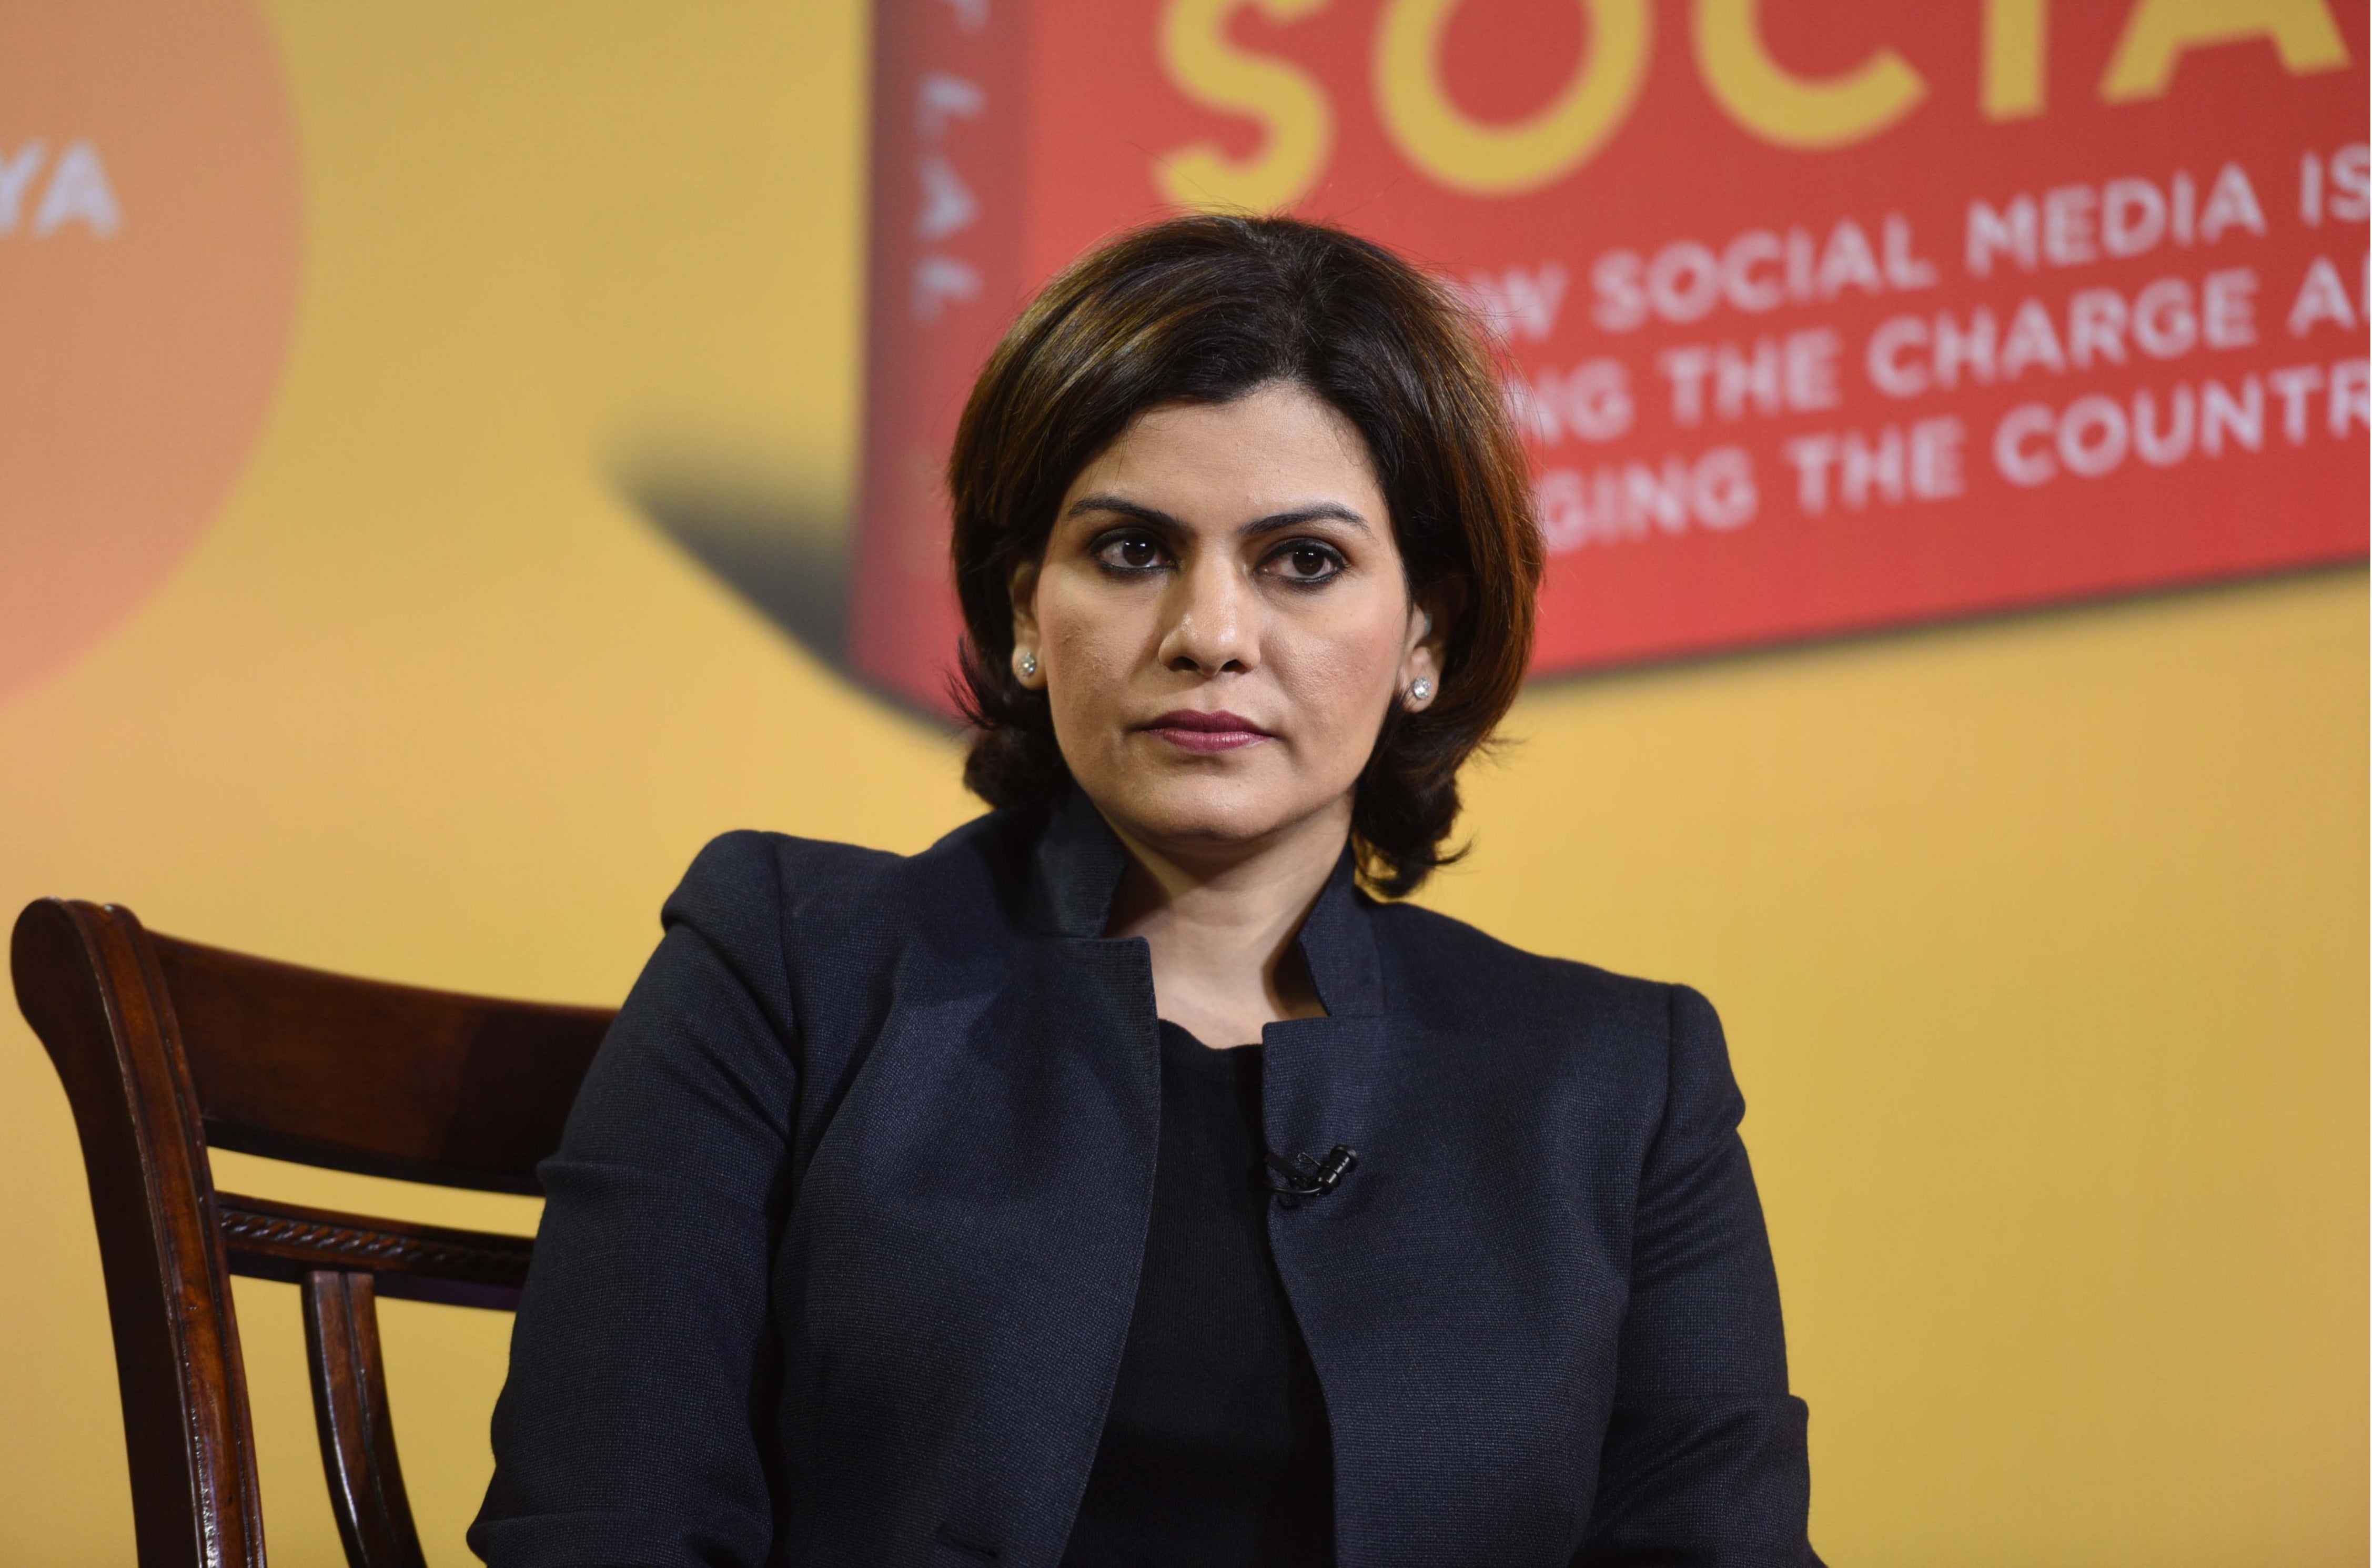 Nidhi Razdan is an Indian television news journalist and author